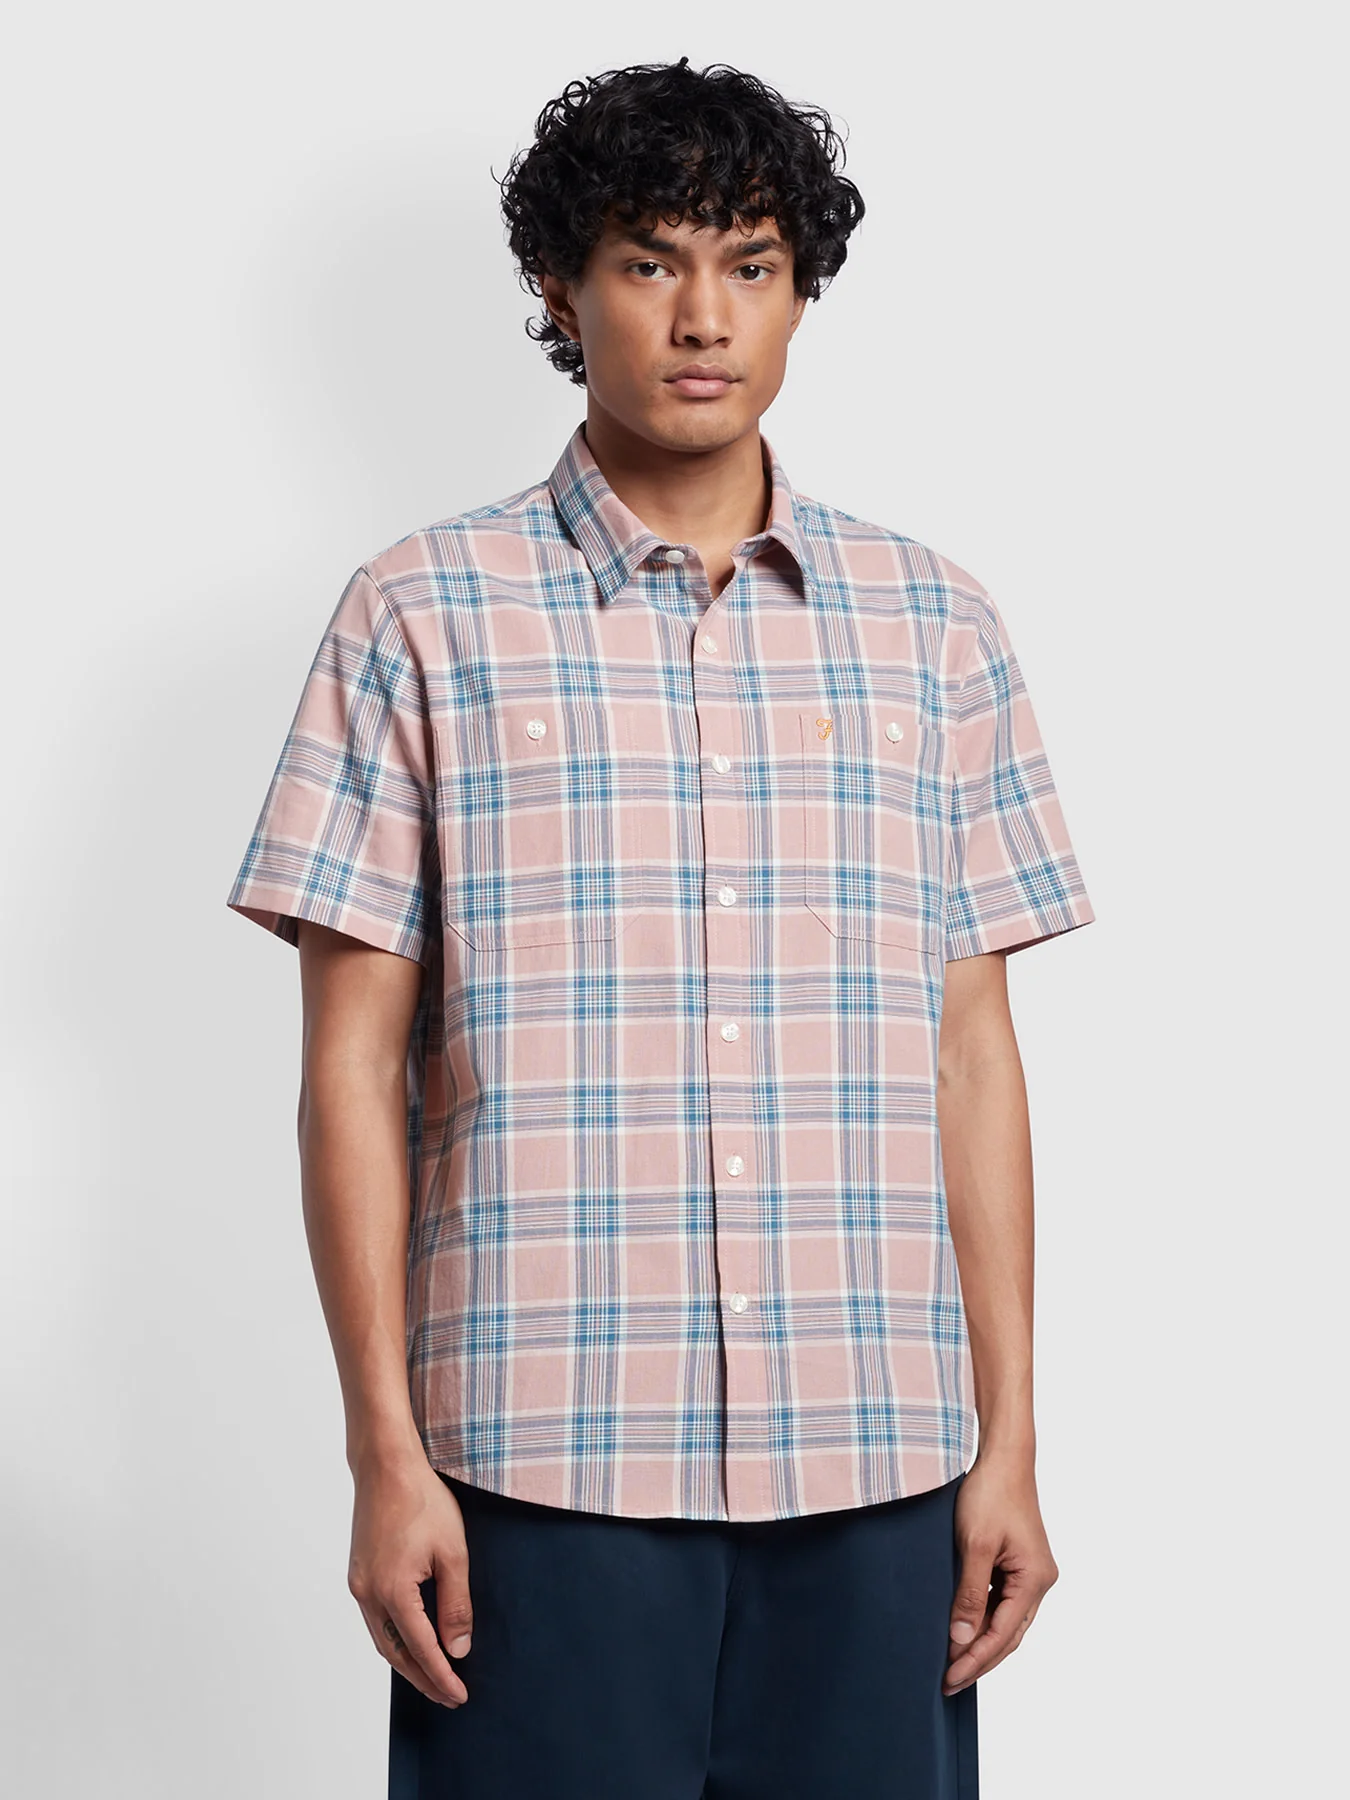 Farah Rocksteady Relaxed Fit Organic Cotton Check Shirt In Dark Pink 